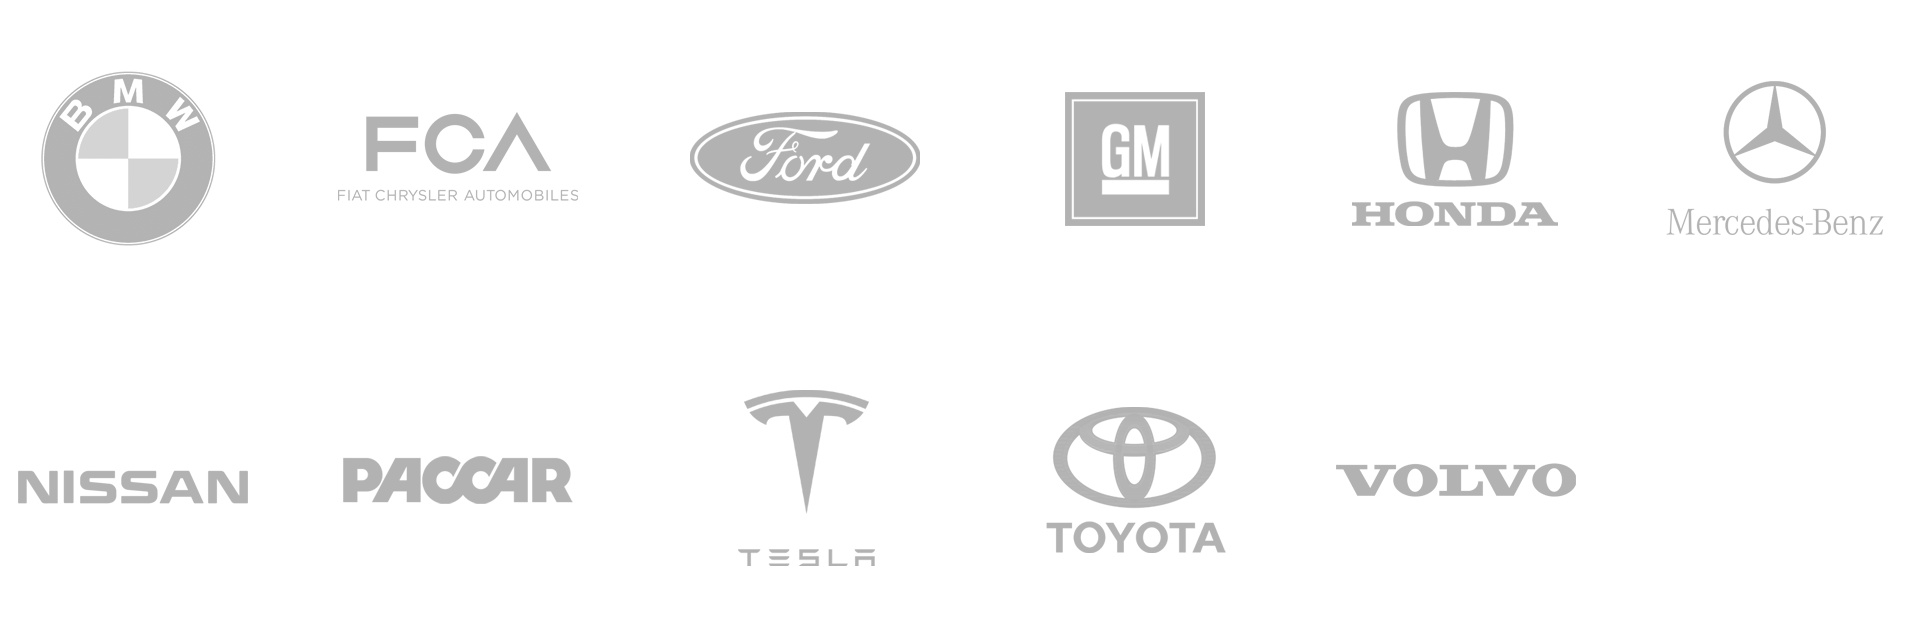 Logos of Ford, GM, Honda, Mercedes-Benz, Nissan, Paccar, Tesla, Toyota, Volvo, and BMW